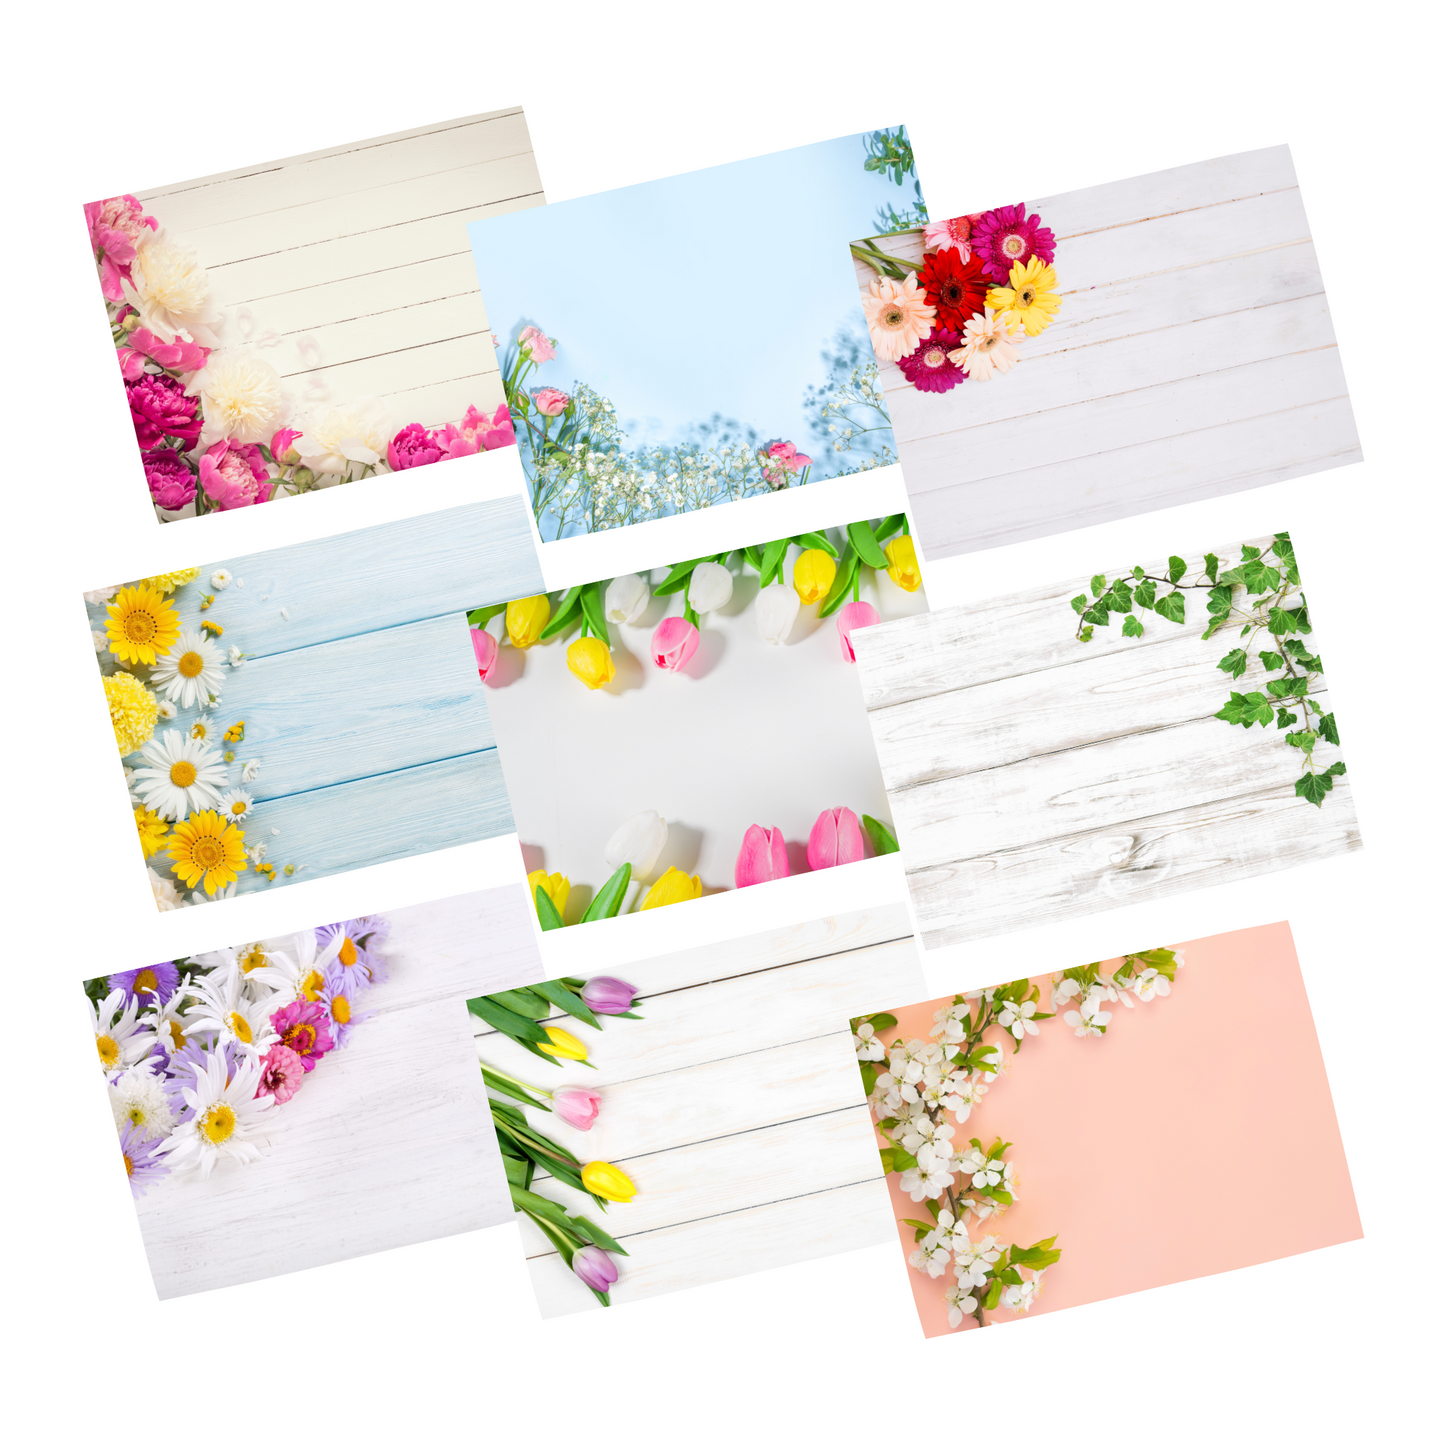 10 Mixed Floral Display Cards • Pack Of 10